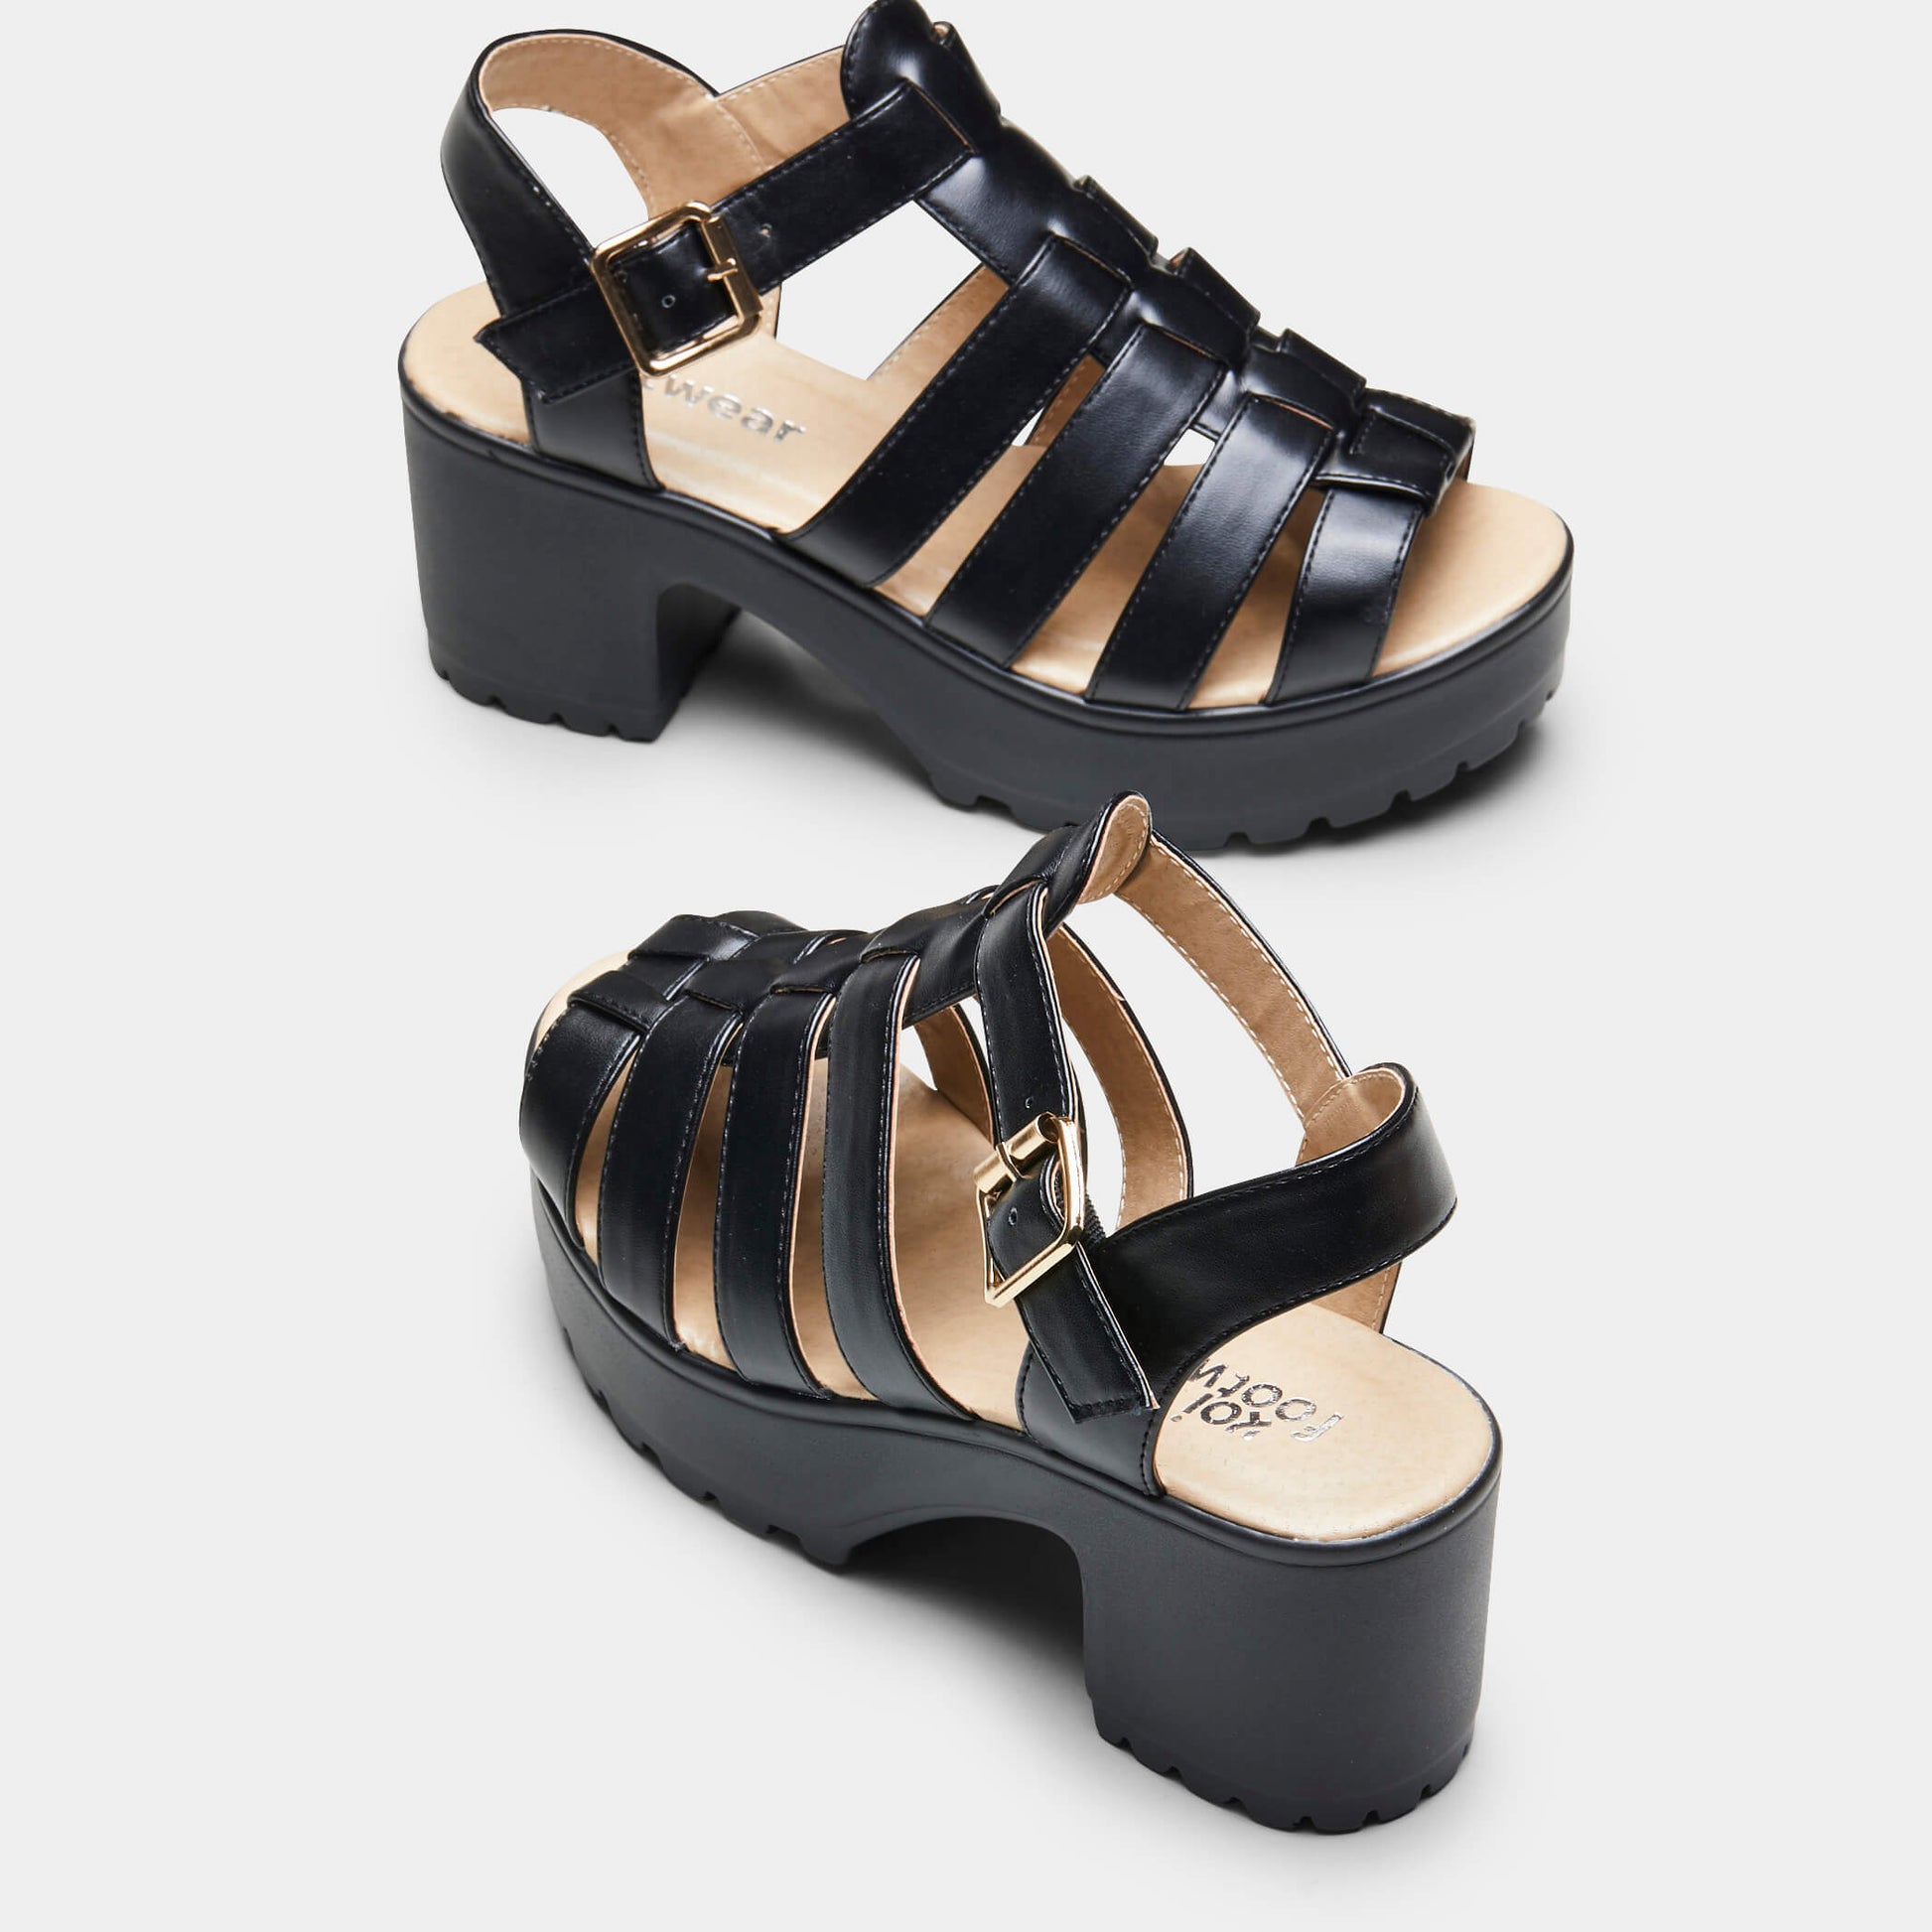 SII Black Strappy Cleated Sandals - Sandals - KOI Footwear - Black - Top View